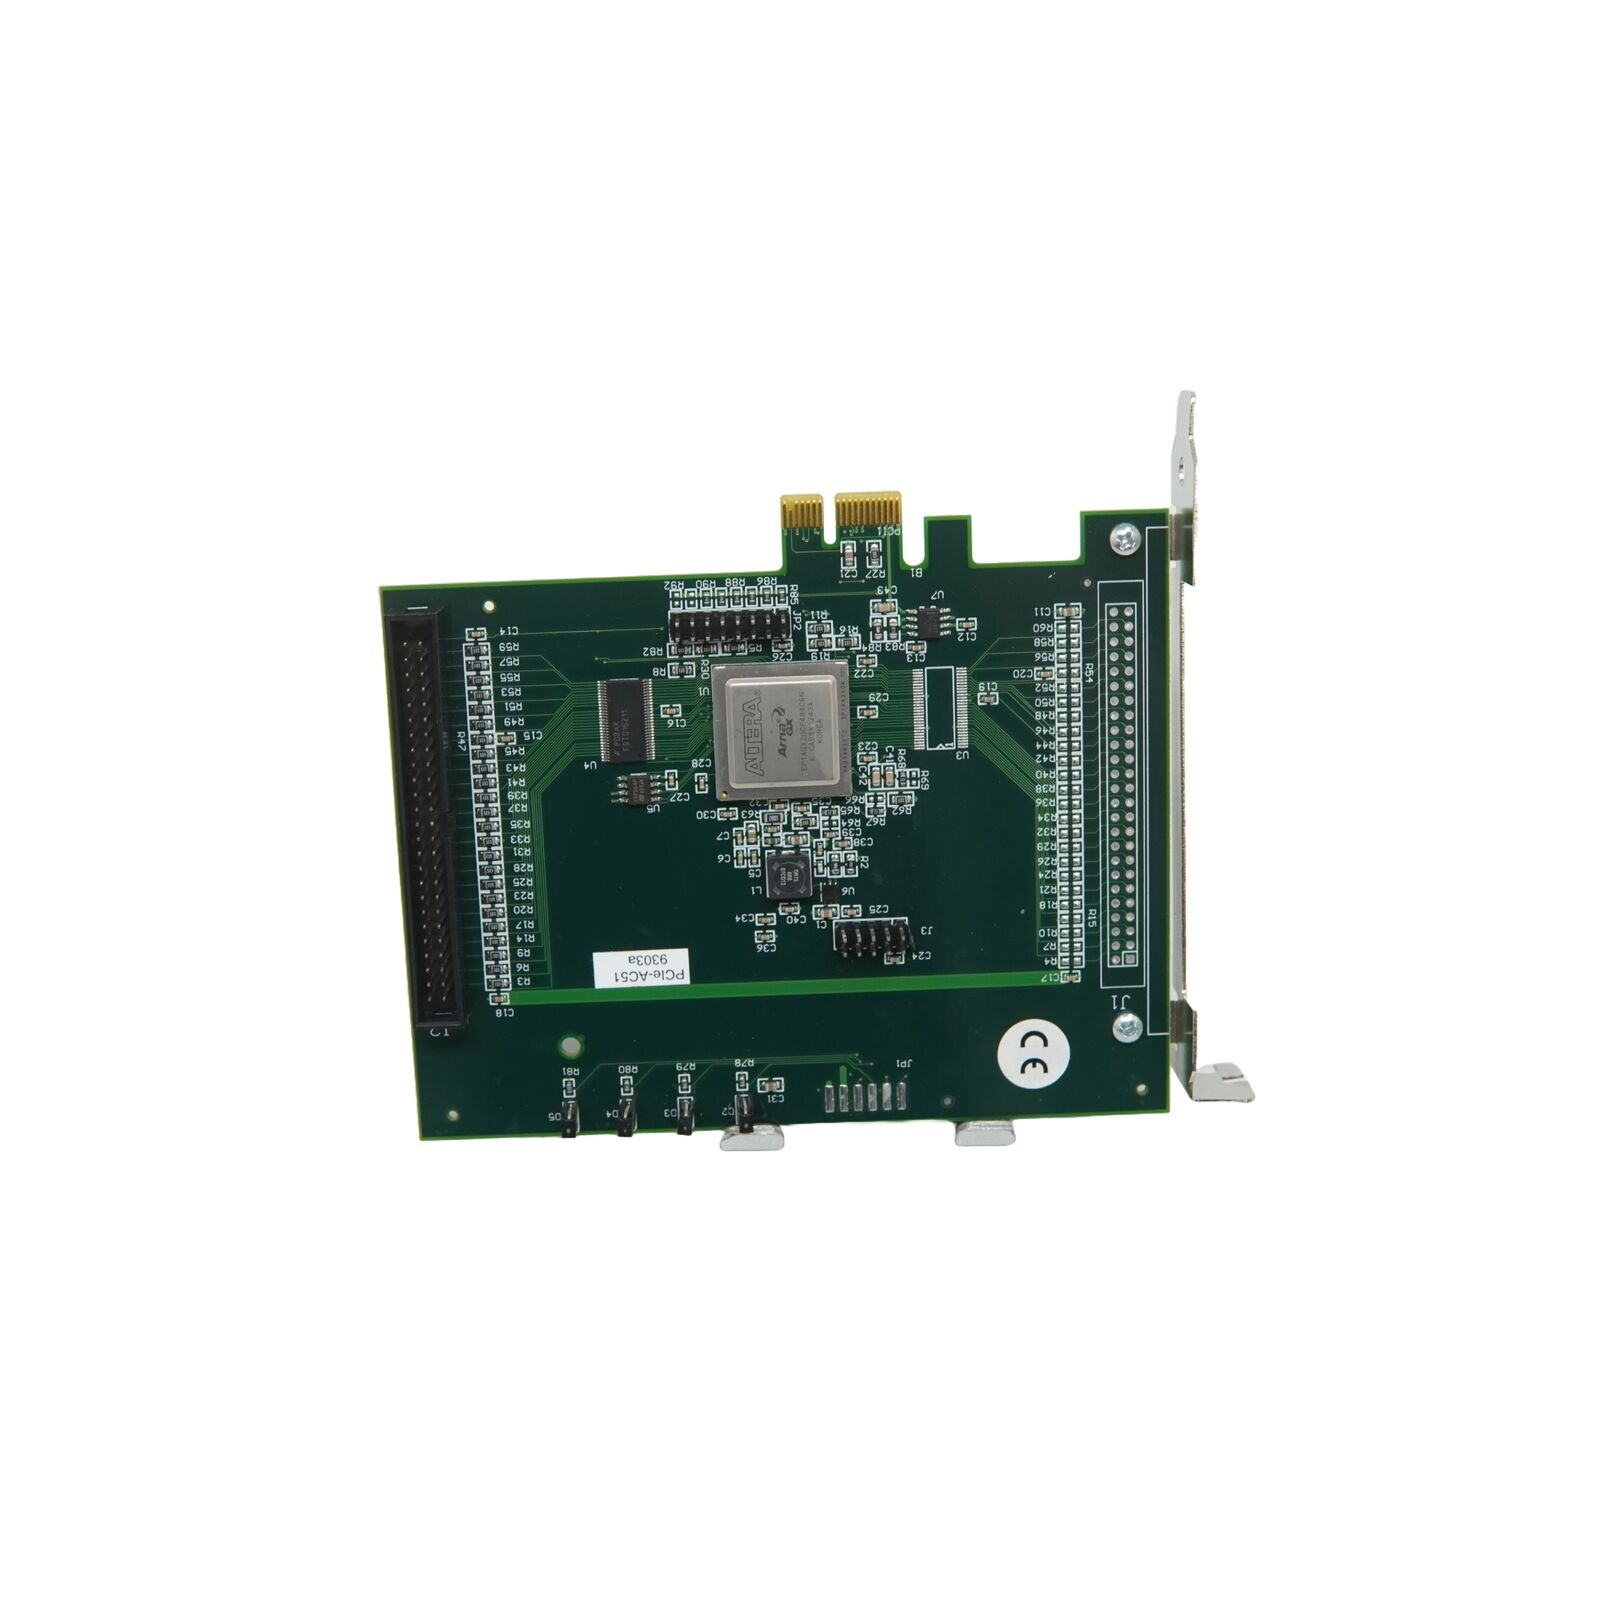 Opto 22 PCIe-AC51 9303a High-Speed Adapter Card